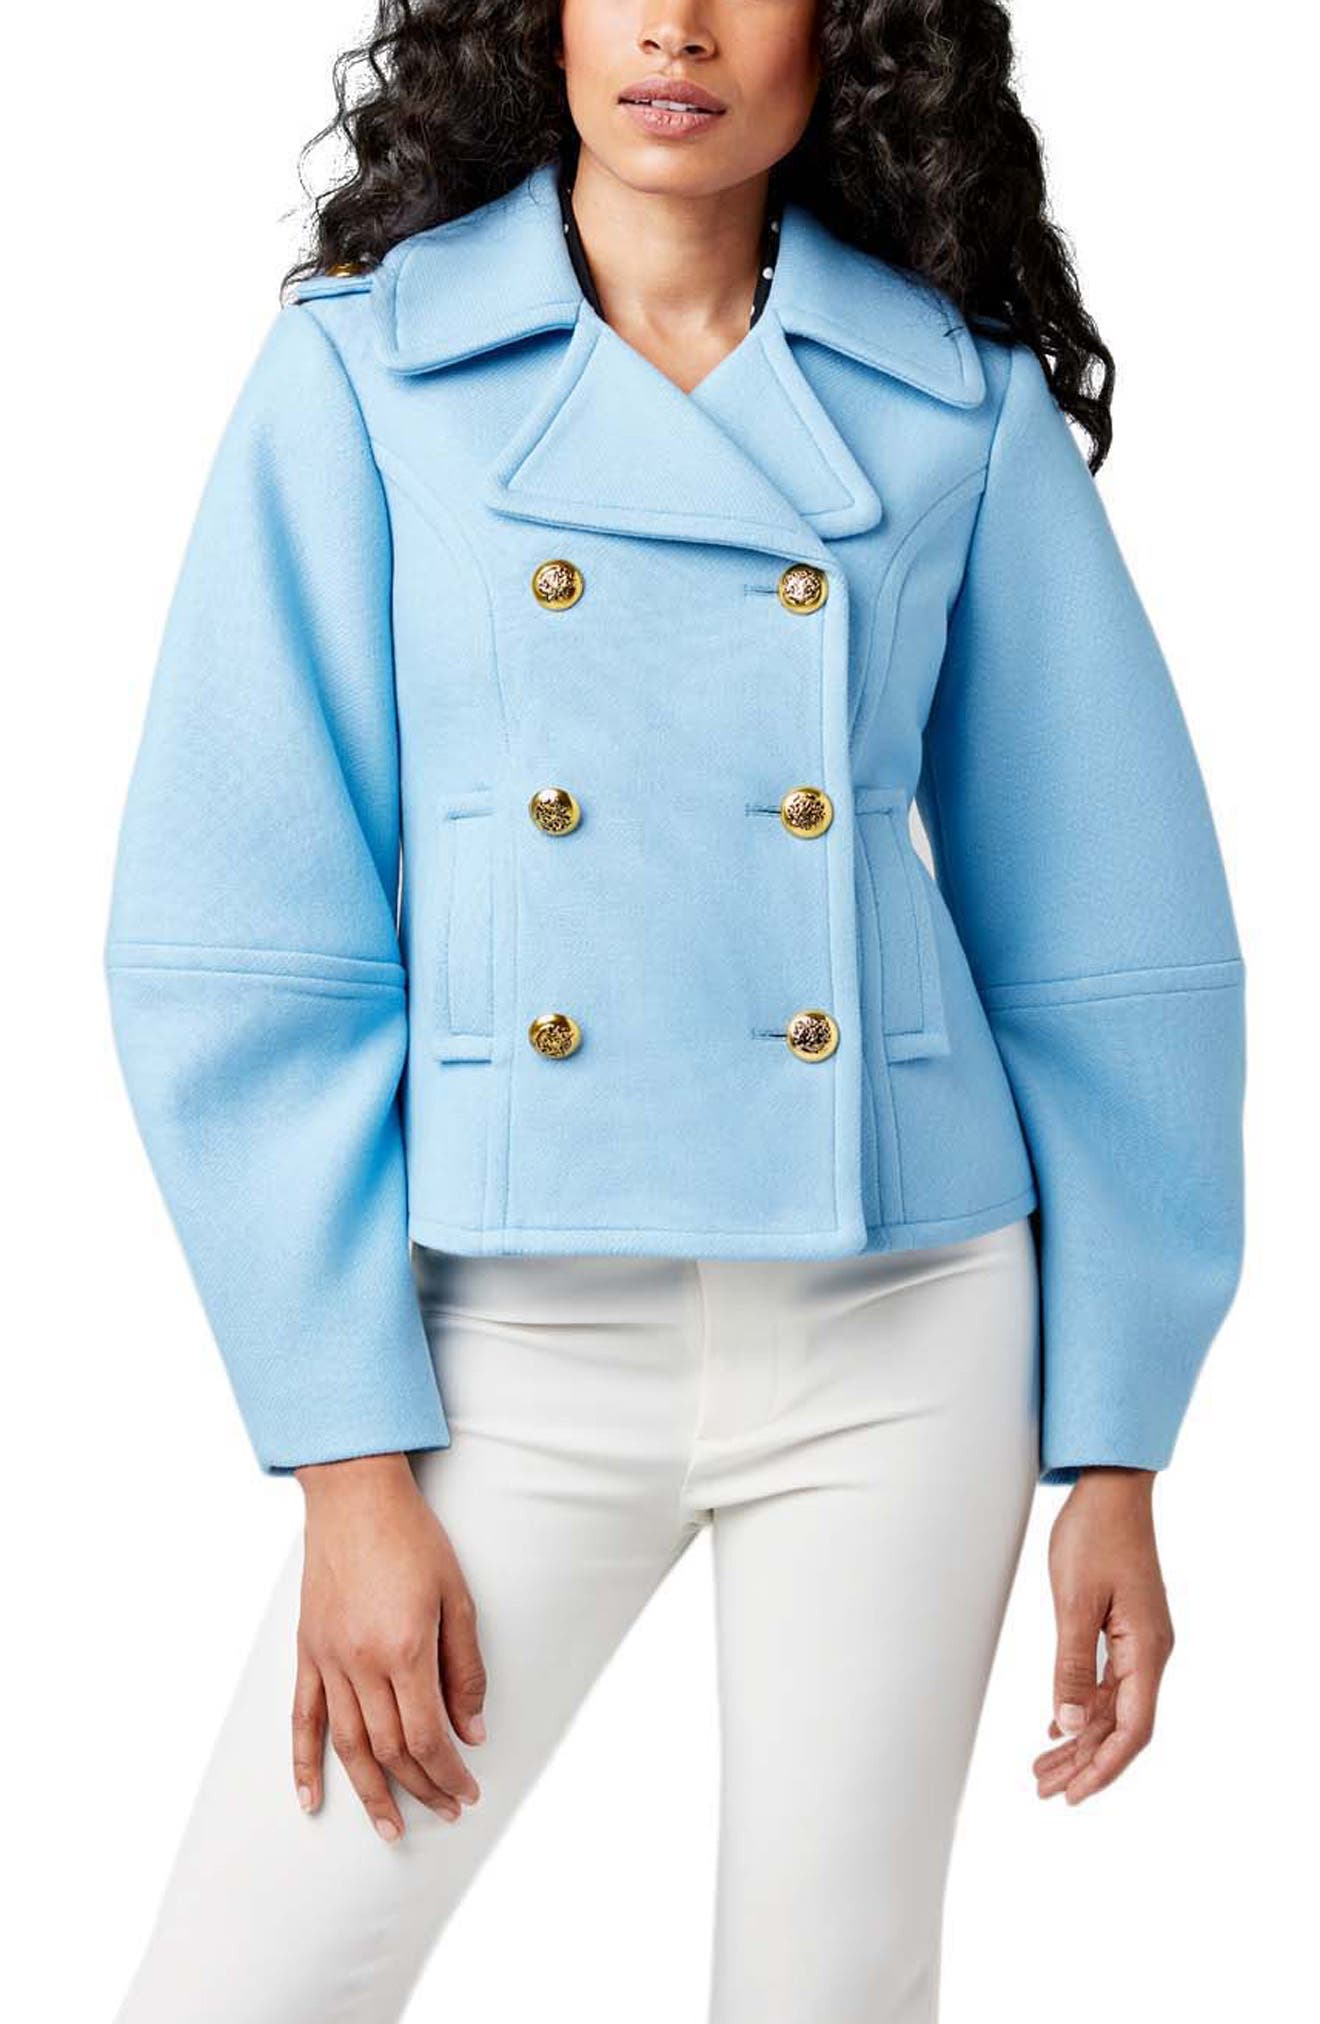 Good Lad Toddler Thru 4/6X Girls Double Breasted Turquoise Fleece Dress Coat with Fur Trim and Matching Hat